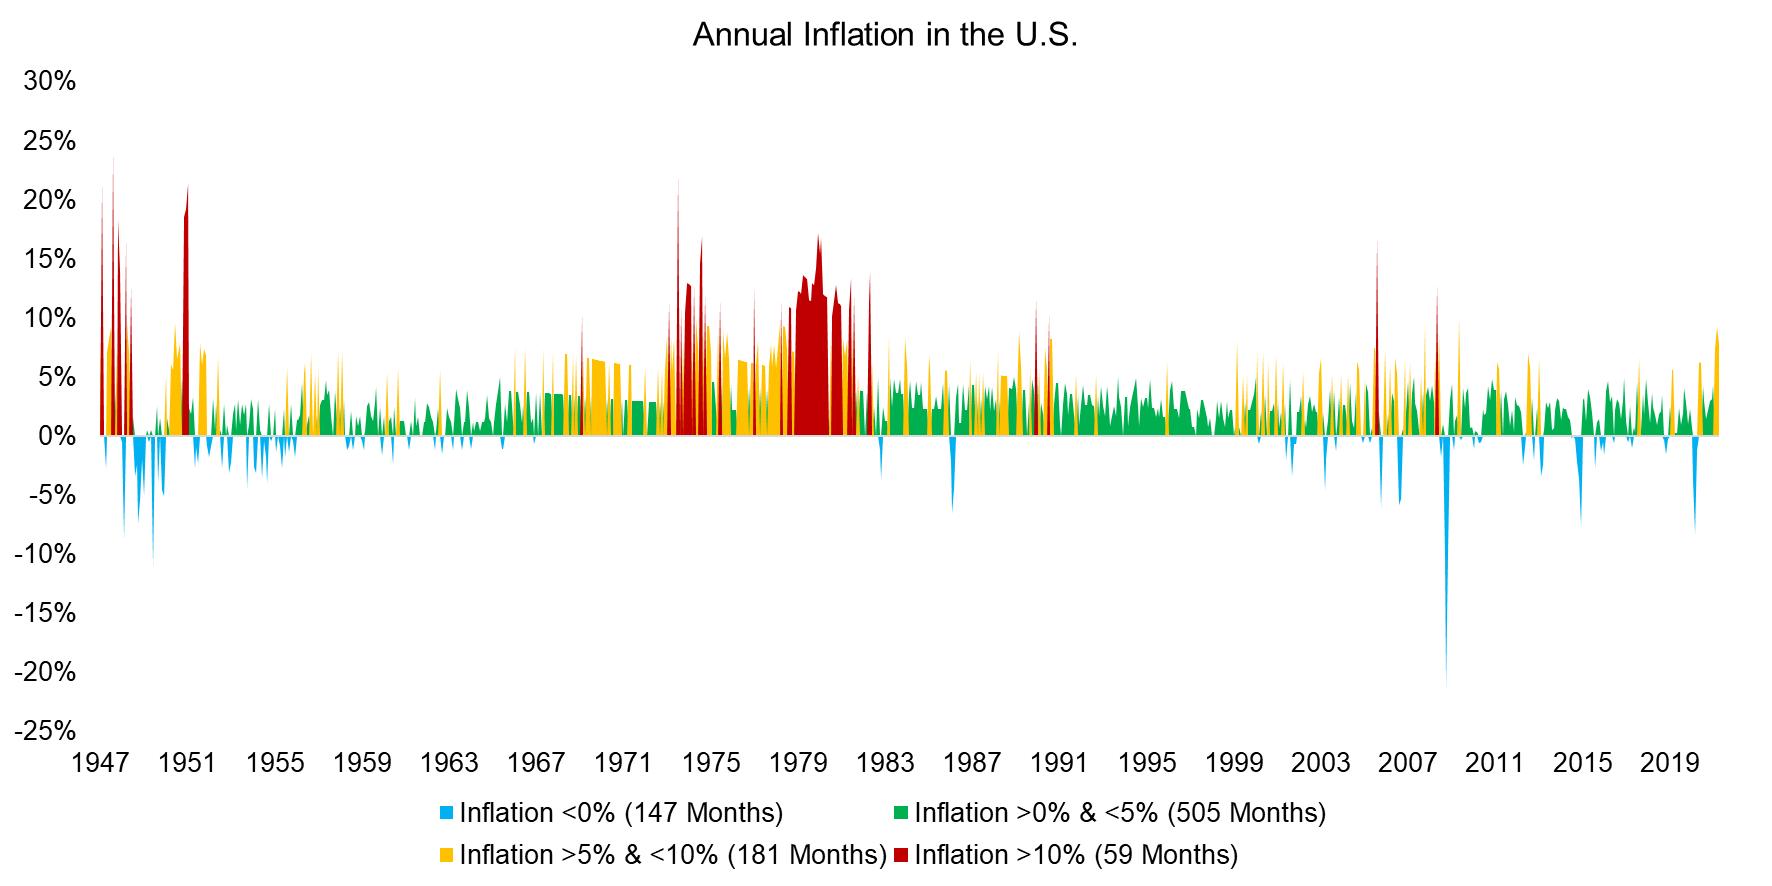 Annual Inflation in the U.S.